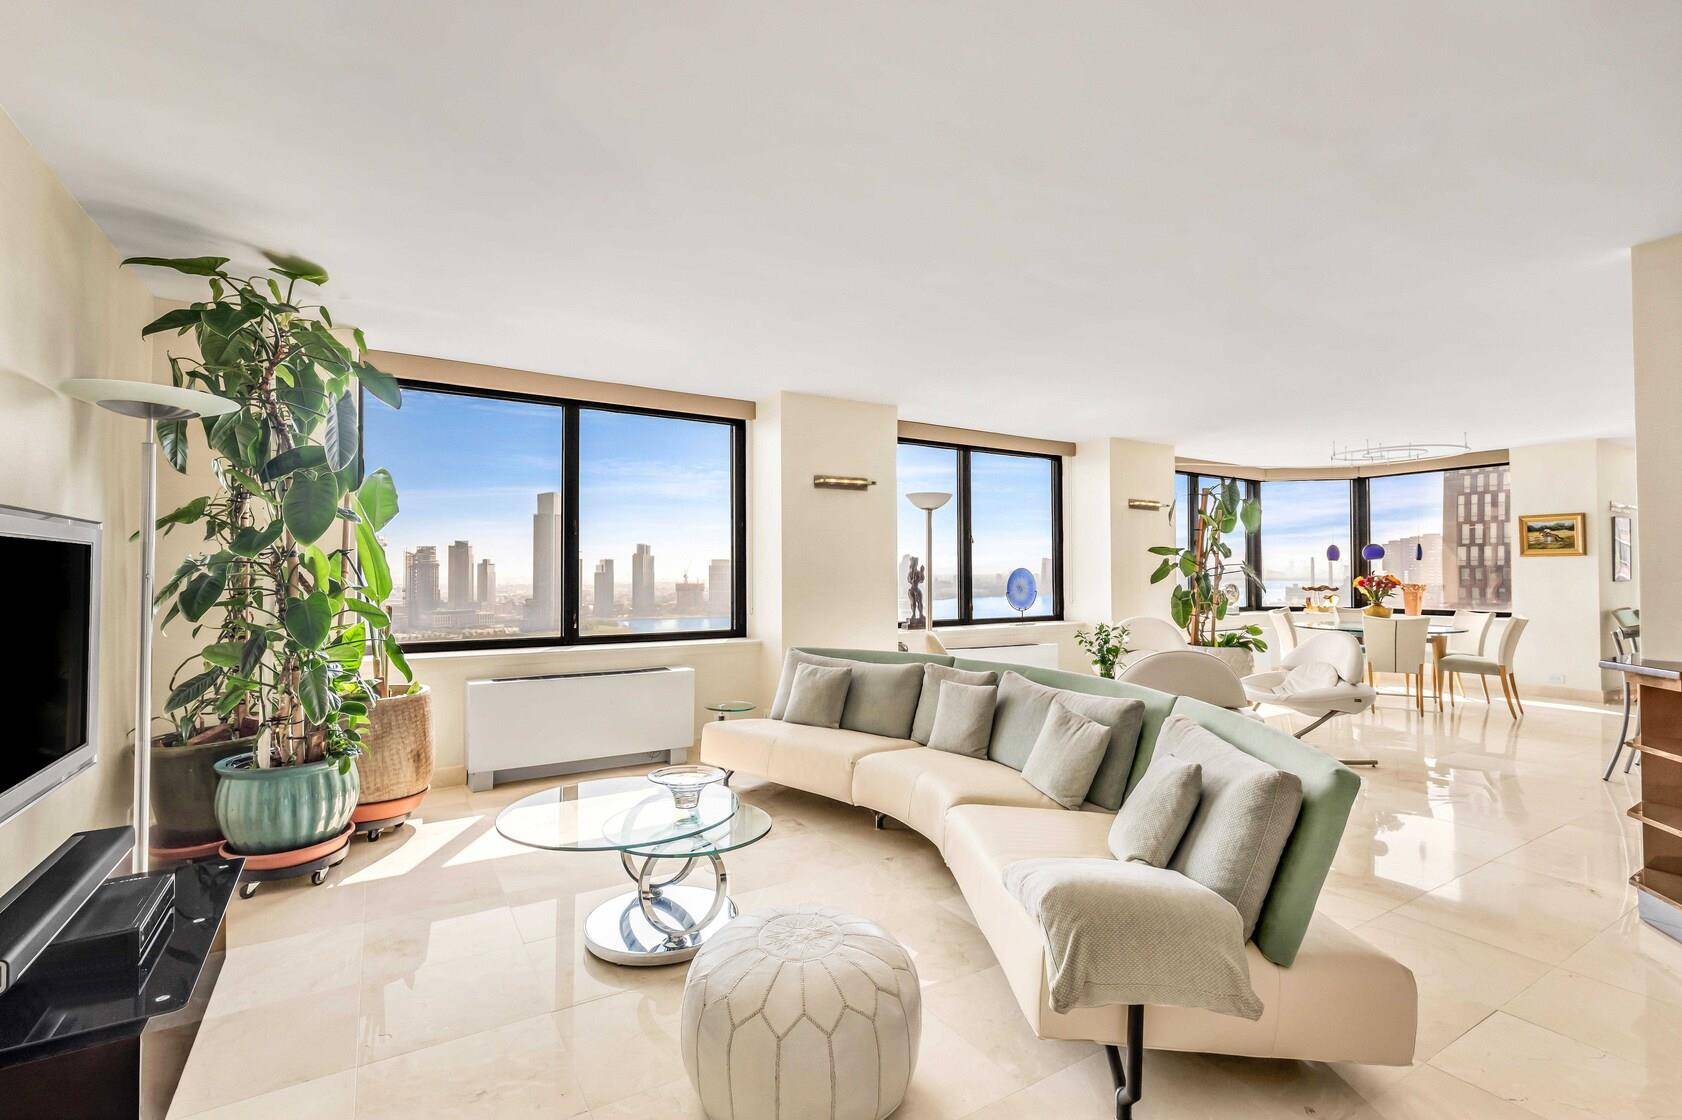 It is all about the EAST RIVER VIEW, OPEN KITCHEN facing the RIVER, EMPIRE STATE, gorgeous RENOVATIONS, JULY 4th FIRE WORKS in front of the apartment, and best FACILITIES, POOL, ...